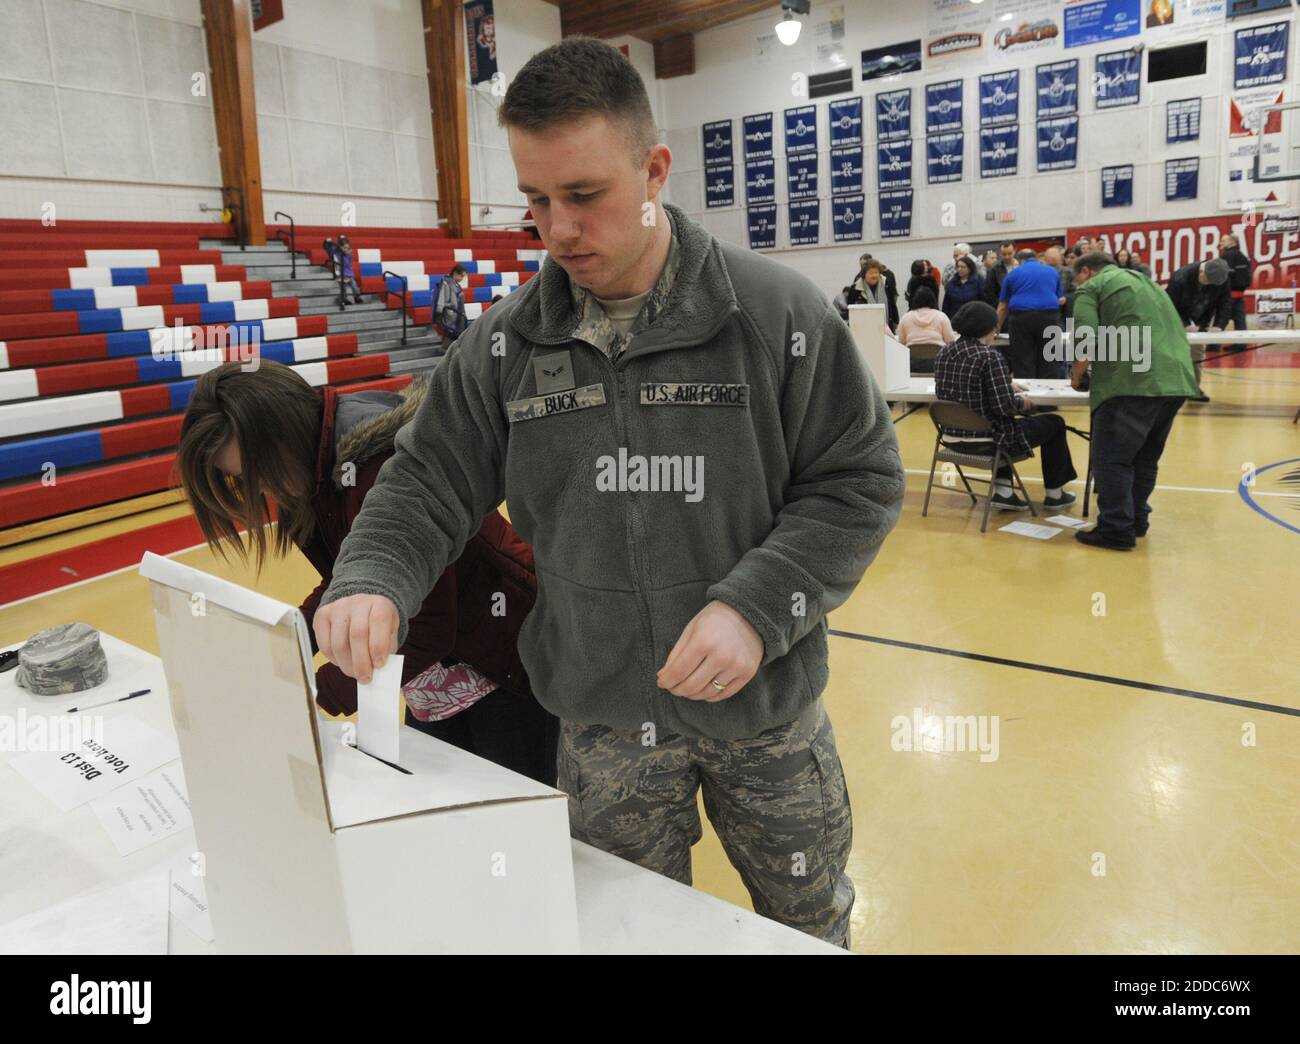 NO FILM, NO VIDEO, NO TV, NO DOCUMENTARY - Airman 1st Class Nathaniel Buck casts his ballot as his wife, Blair, fills hers in at the Alaska Republican Party Presidential Preference Poll at Anchorage Christian School in Anchorage, Alaska, USA on Tuesday, March 6, 2012. Voters in 10 states are at the polls amid Super Tuesday, the most delegate-rich day of the 2012 GOP presidential campaign. Photo by Erik Hill/Anchorage Daily News/MCT/ABACAPRESS.COM Stock Photo